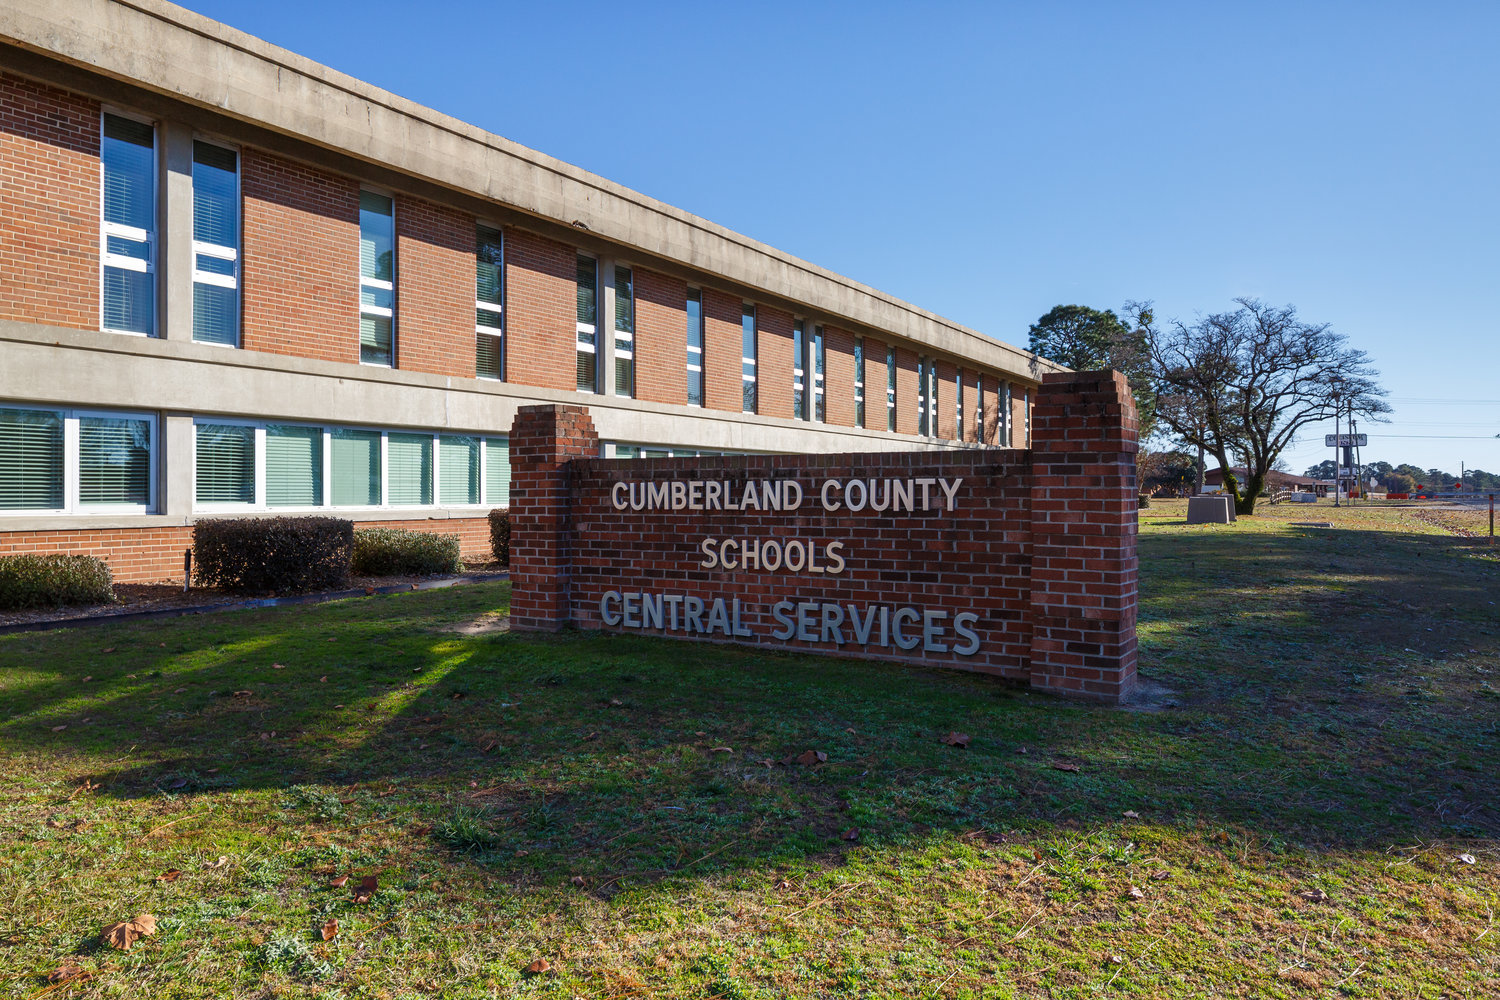 The Cumberland County Board of Education voted to support an election redistricting plan that would make minimal changes.